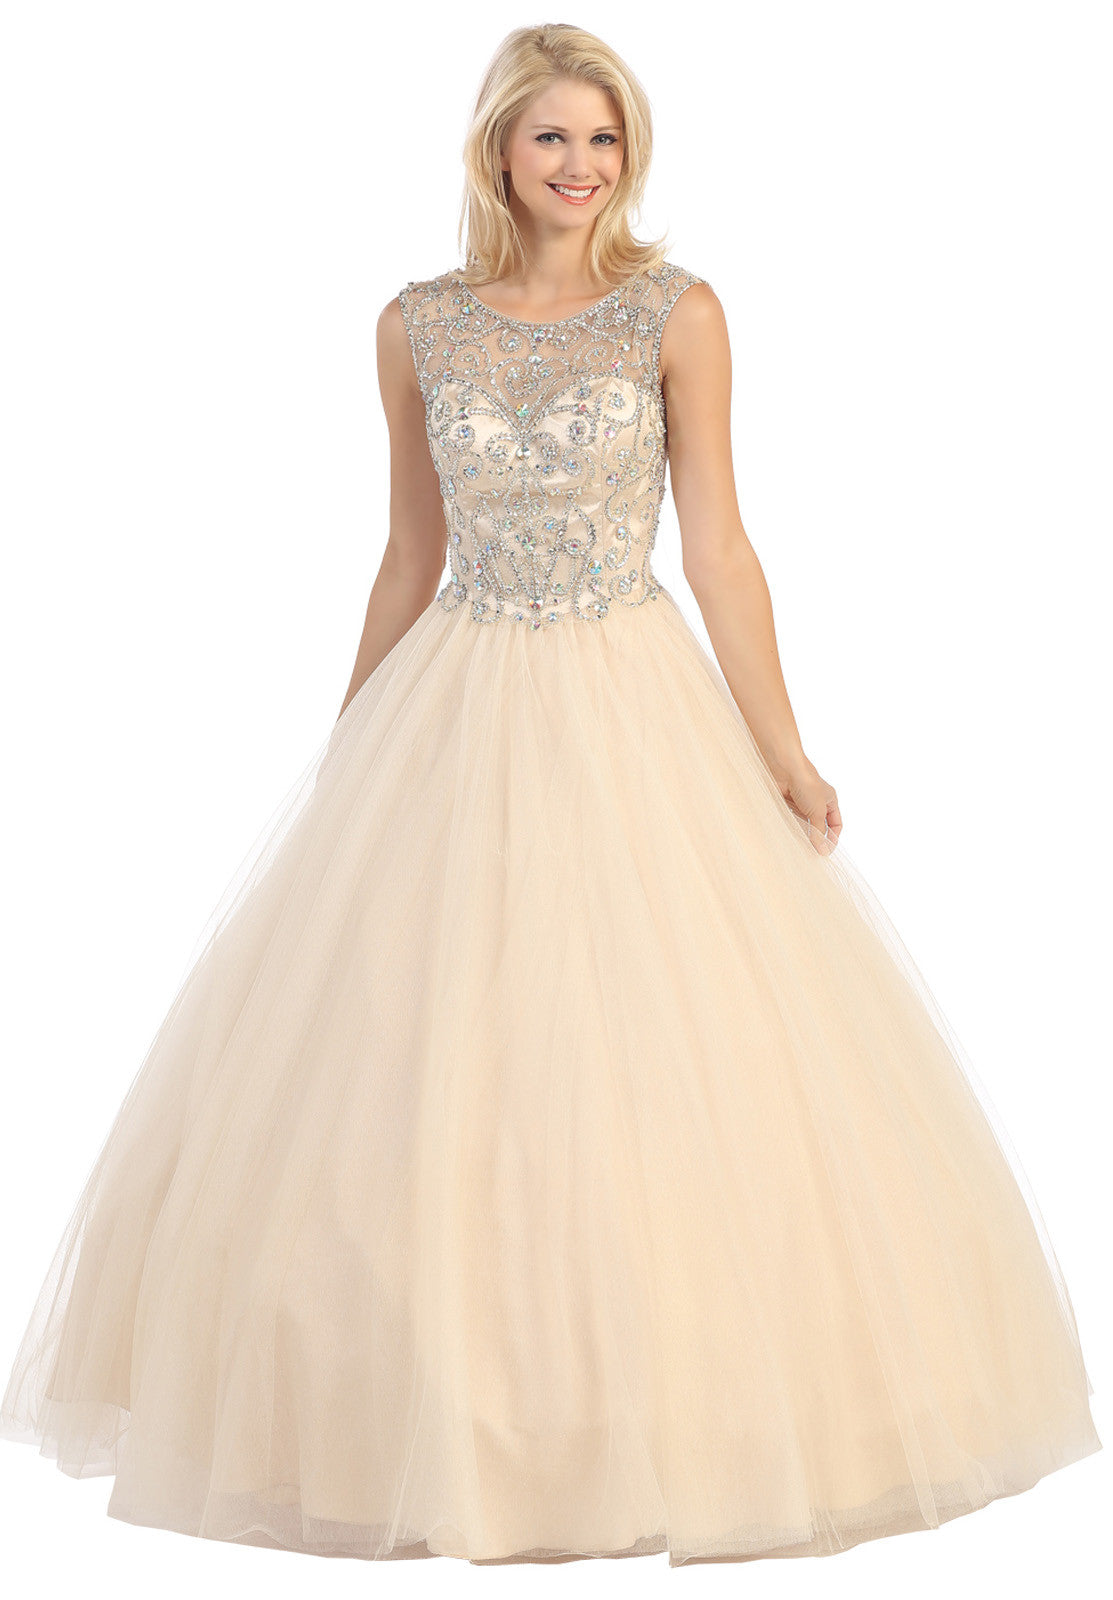 Meshed Yoke Bateau Neckline Champagne/Gold Ball Gown